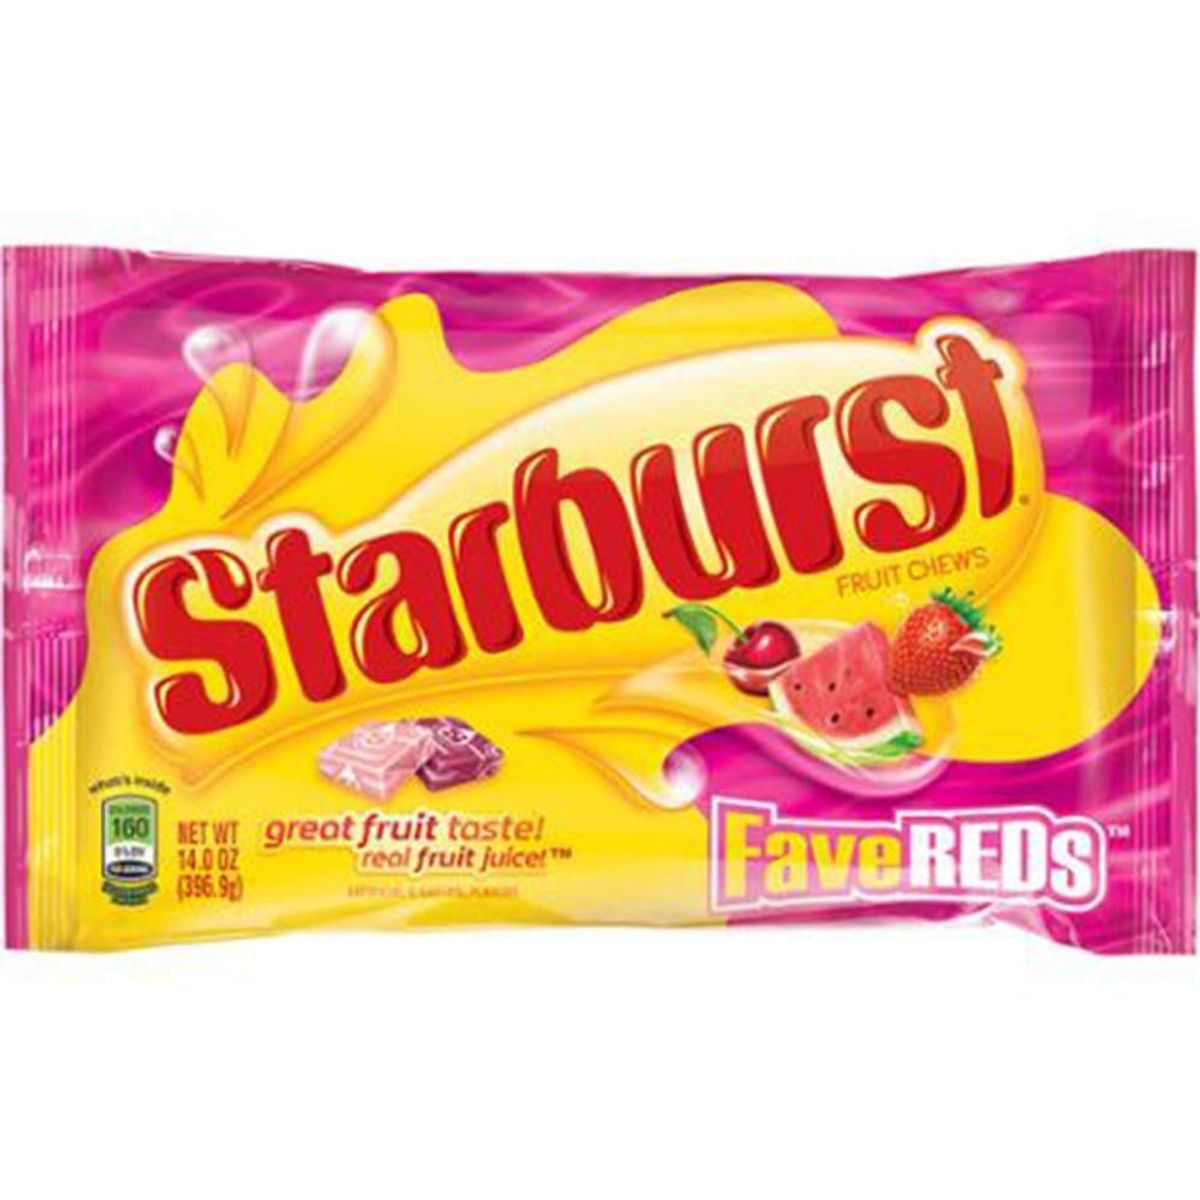 YASSSSS: Starburst Now Sells Bags of JUST Pink and Red